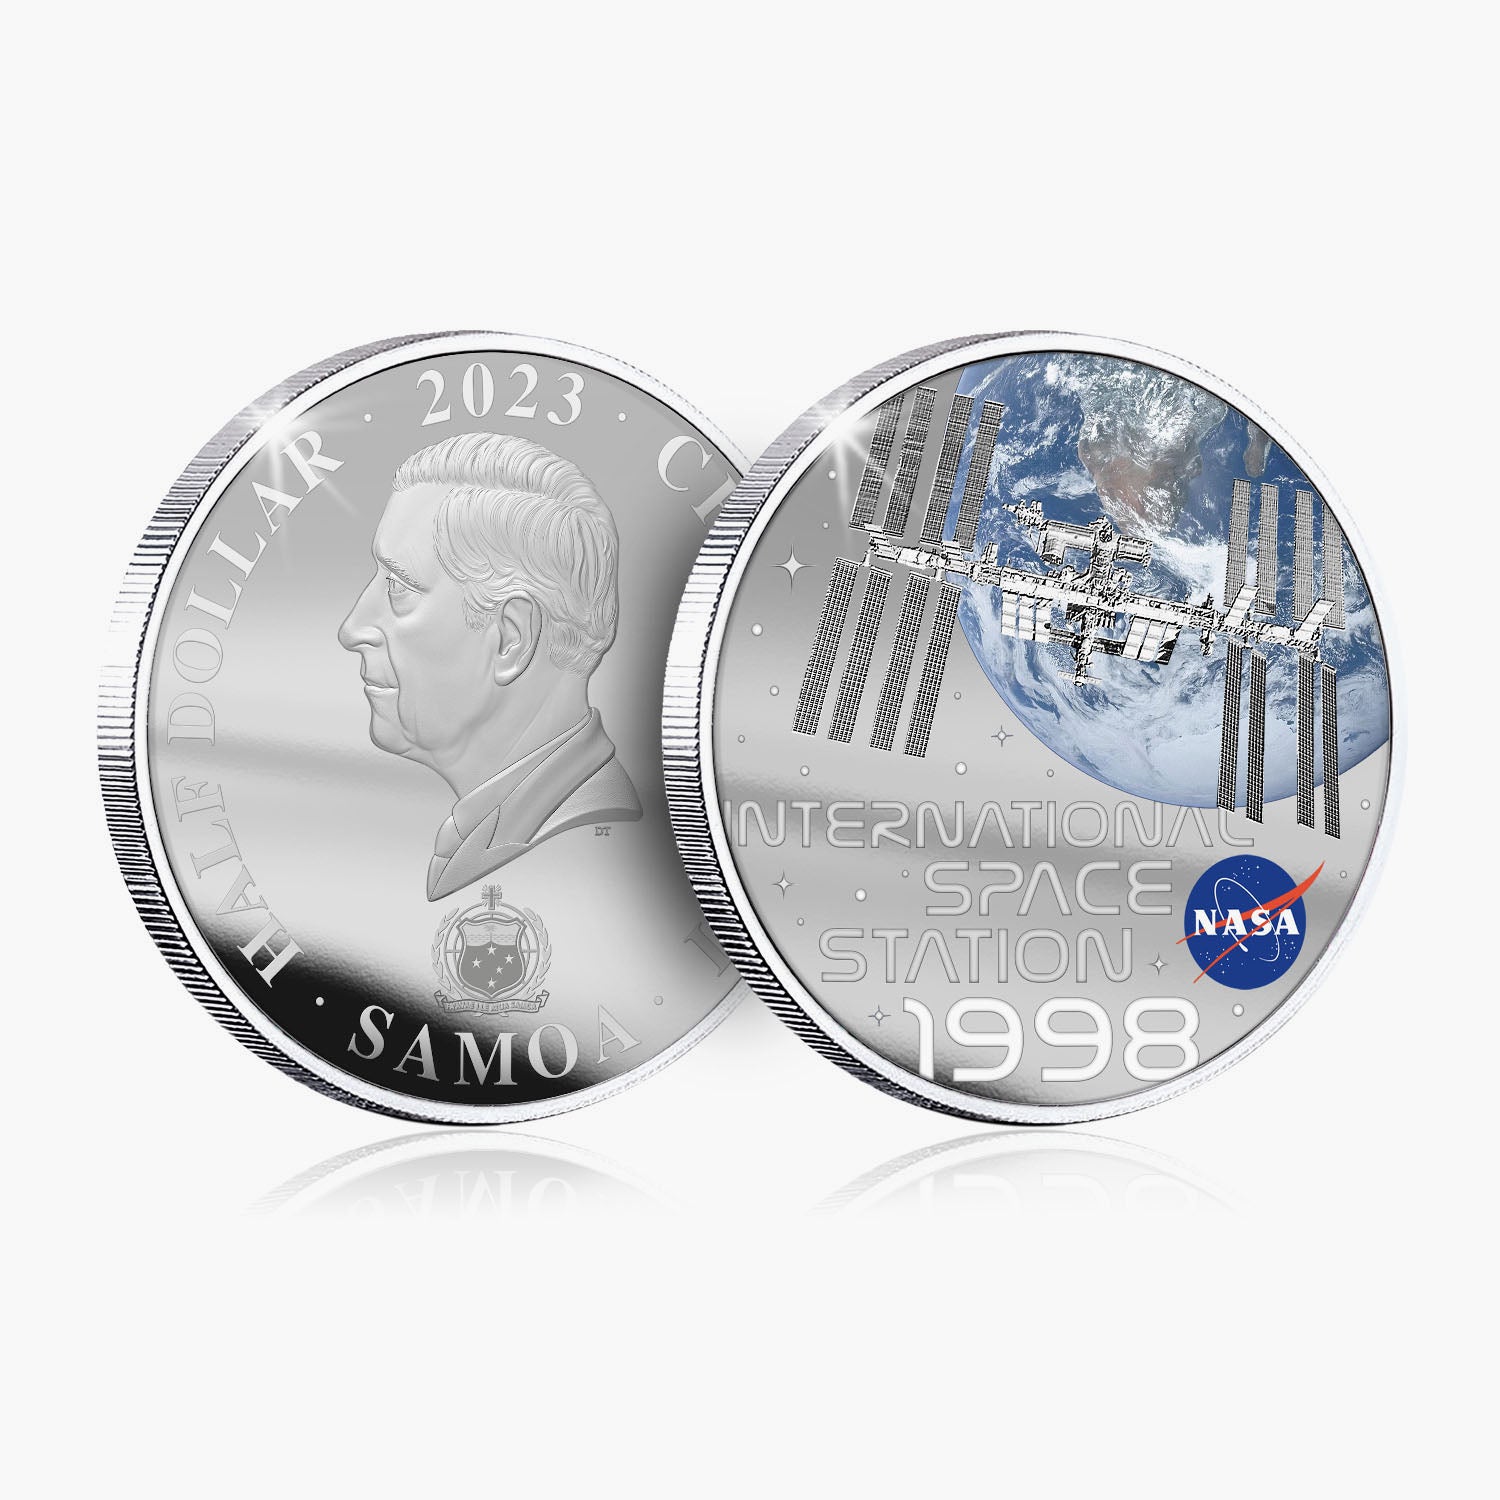 NASA 2023 International Space Station 50mm Silver-plated 2023 Coin